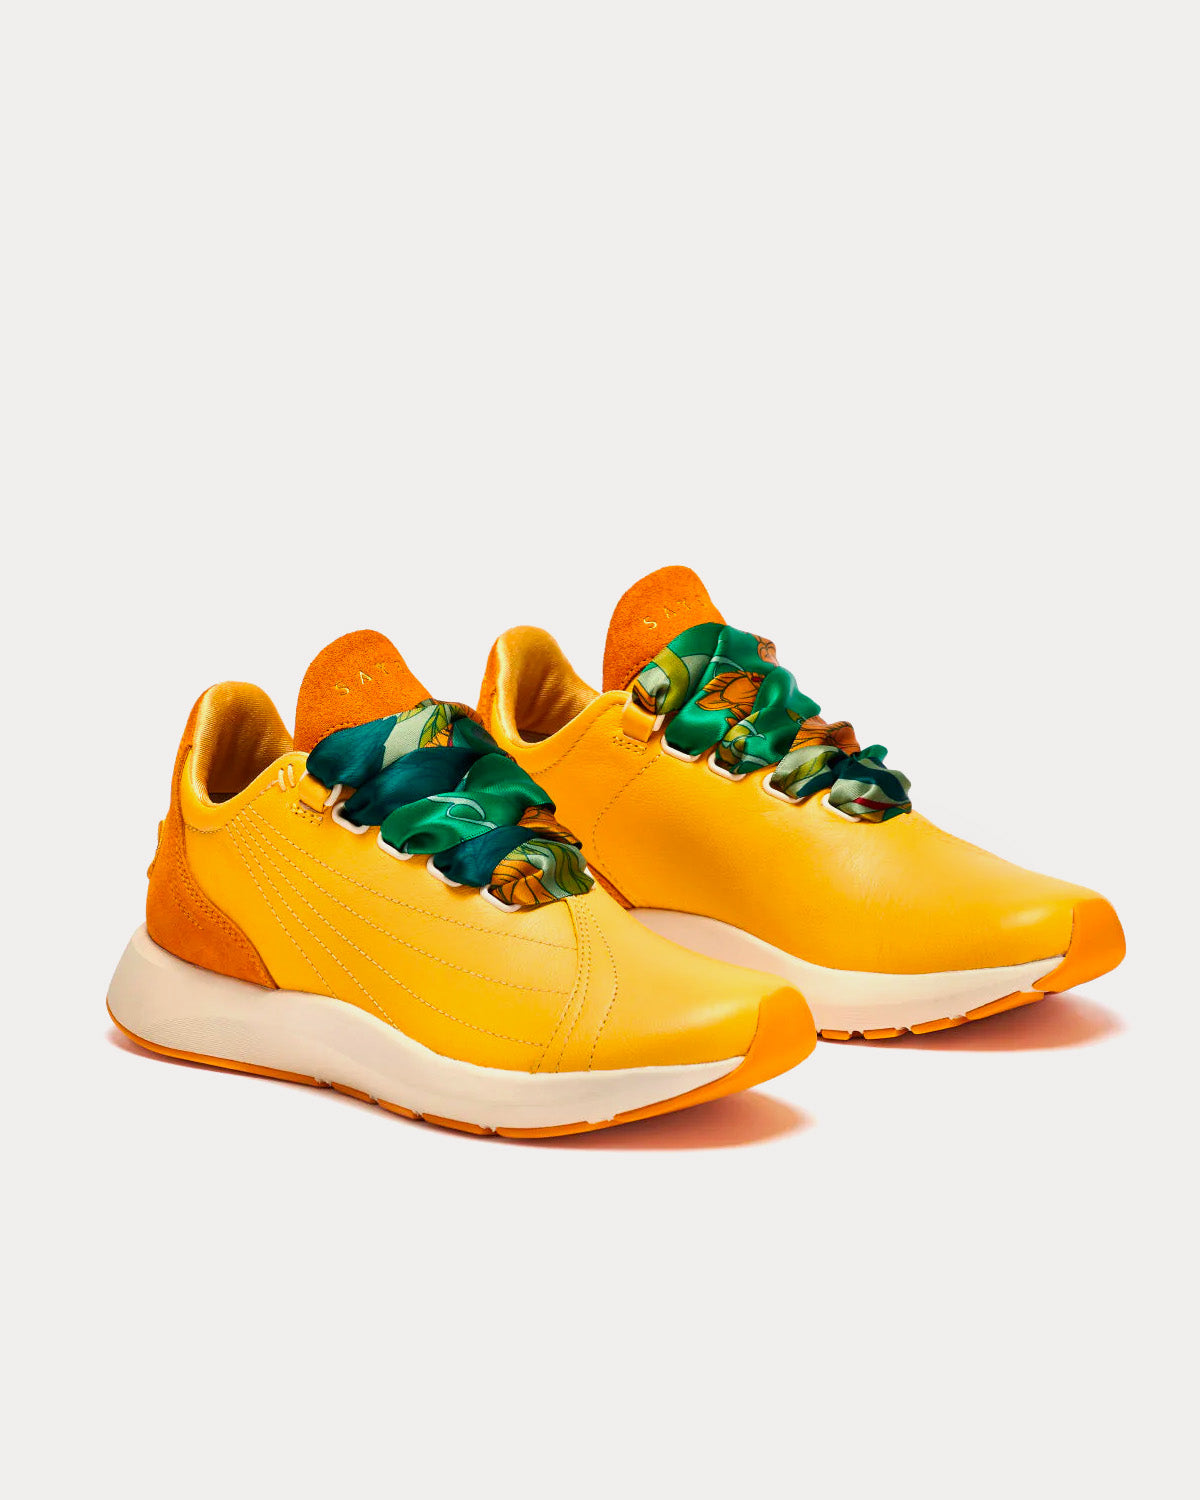 Saysh - Two Yellow Low Top Sneakers